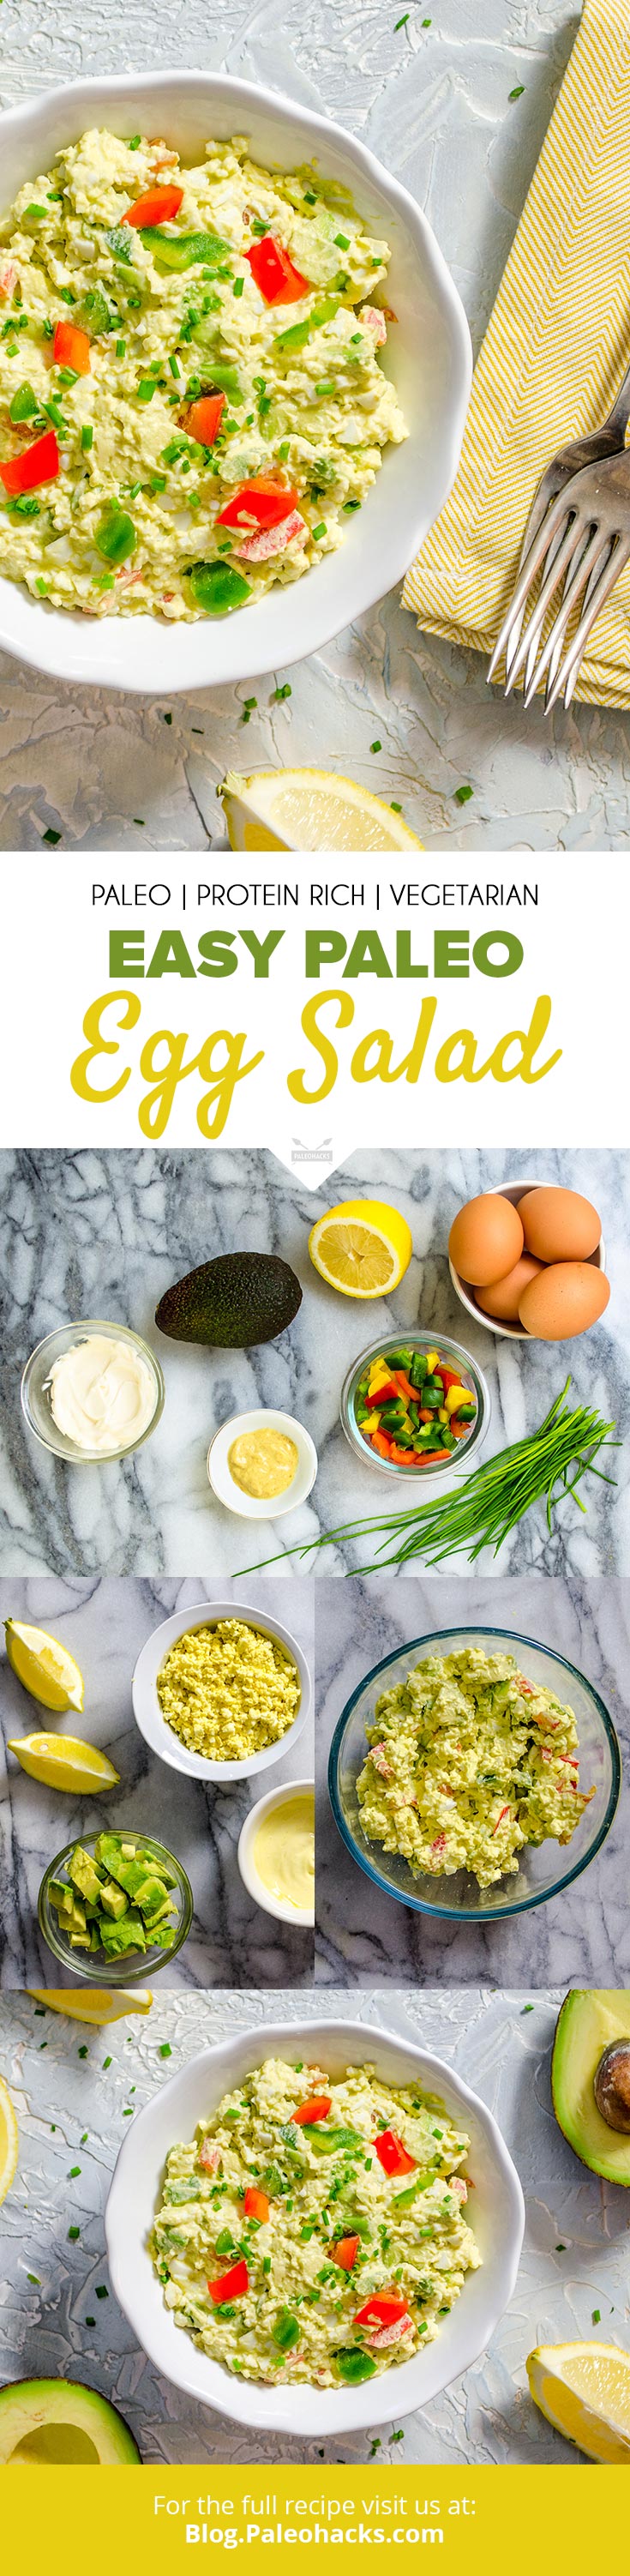 Paleo Egg Salad with creamy avocado and onion-y chives. It’s great as a filling snack, lunch on the go, or as a healthy dish to bring to a picnic.